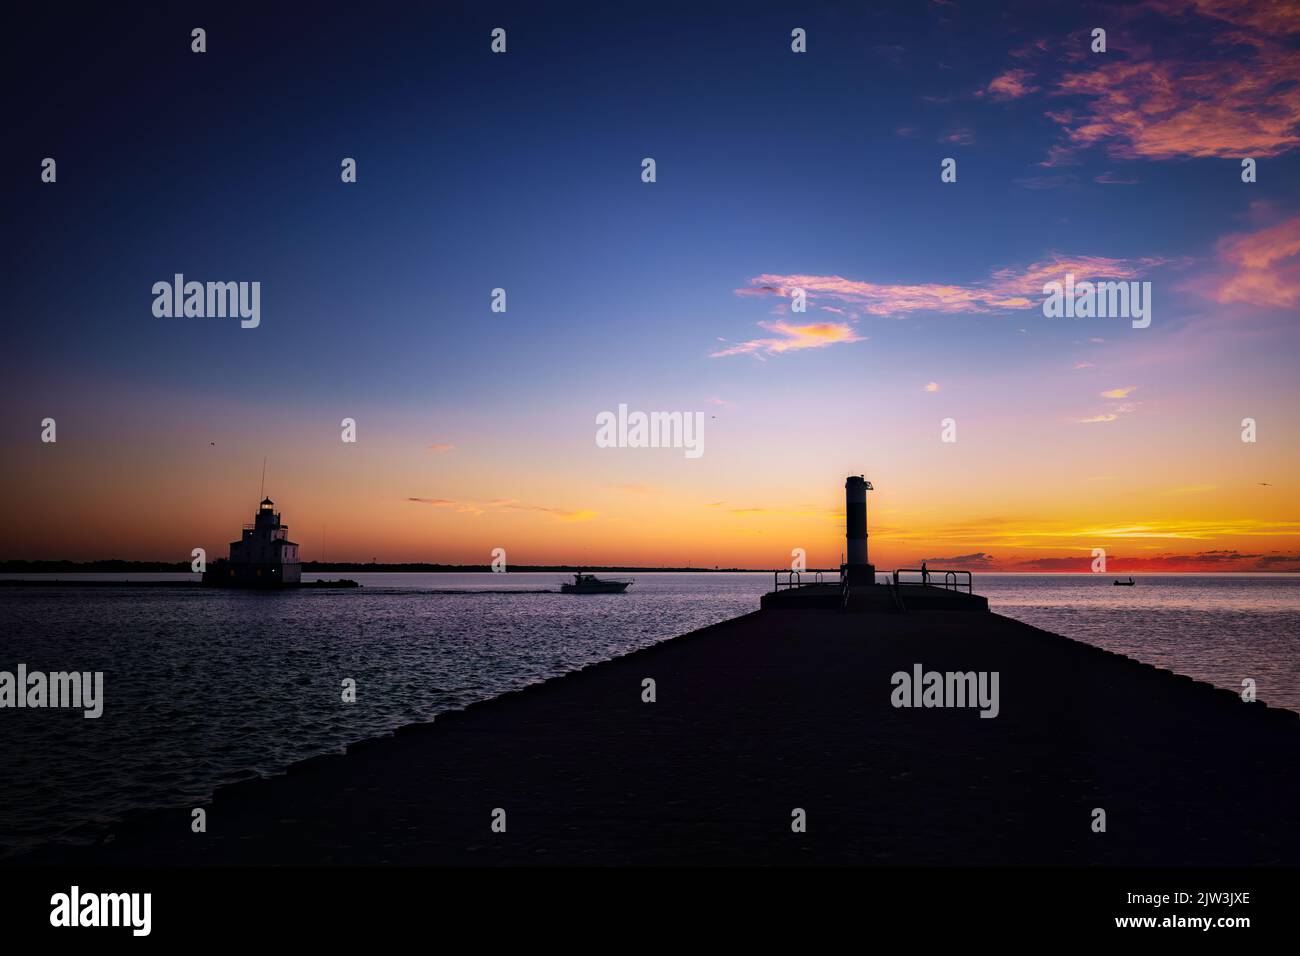 The silhouette of the south pier light at sunrise, with people fishing on Lake Michigan, at Manitowoc, Wisconsin. Stock Photo